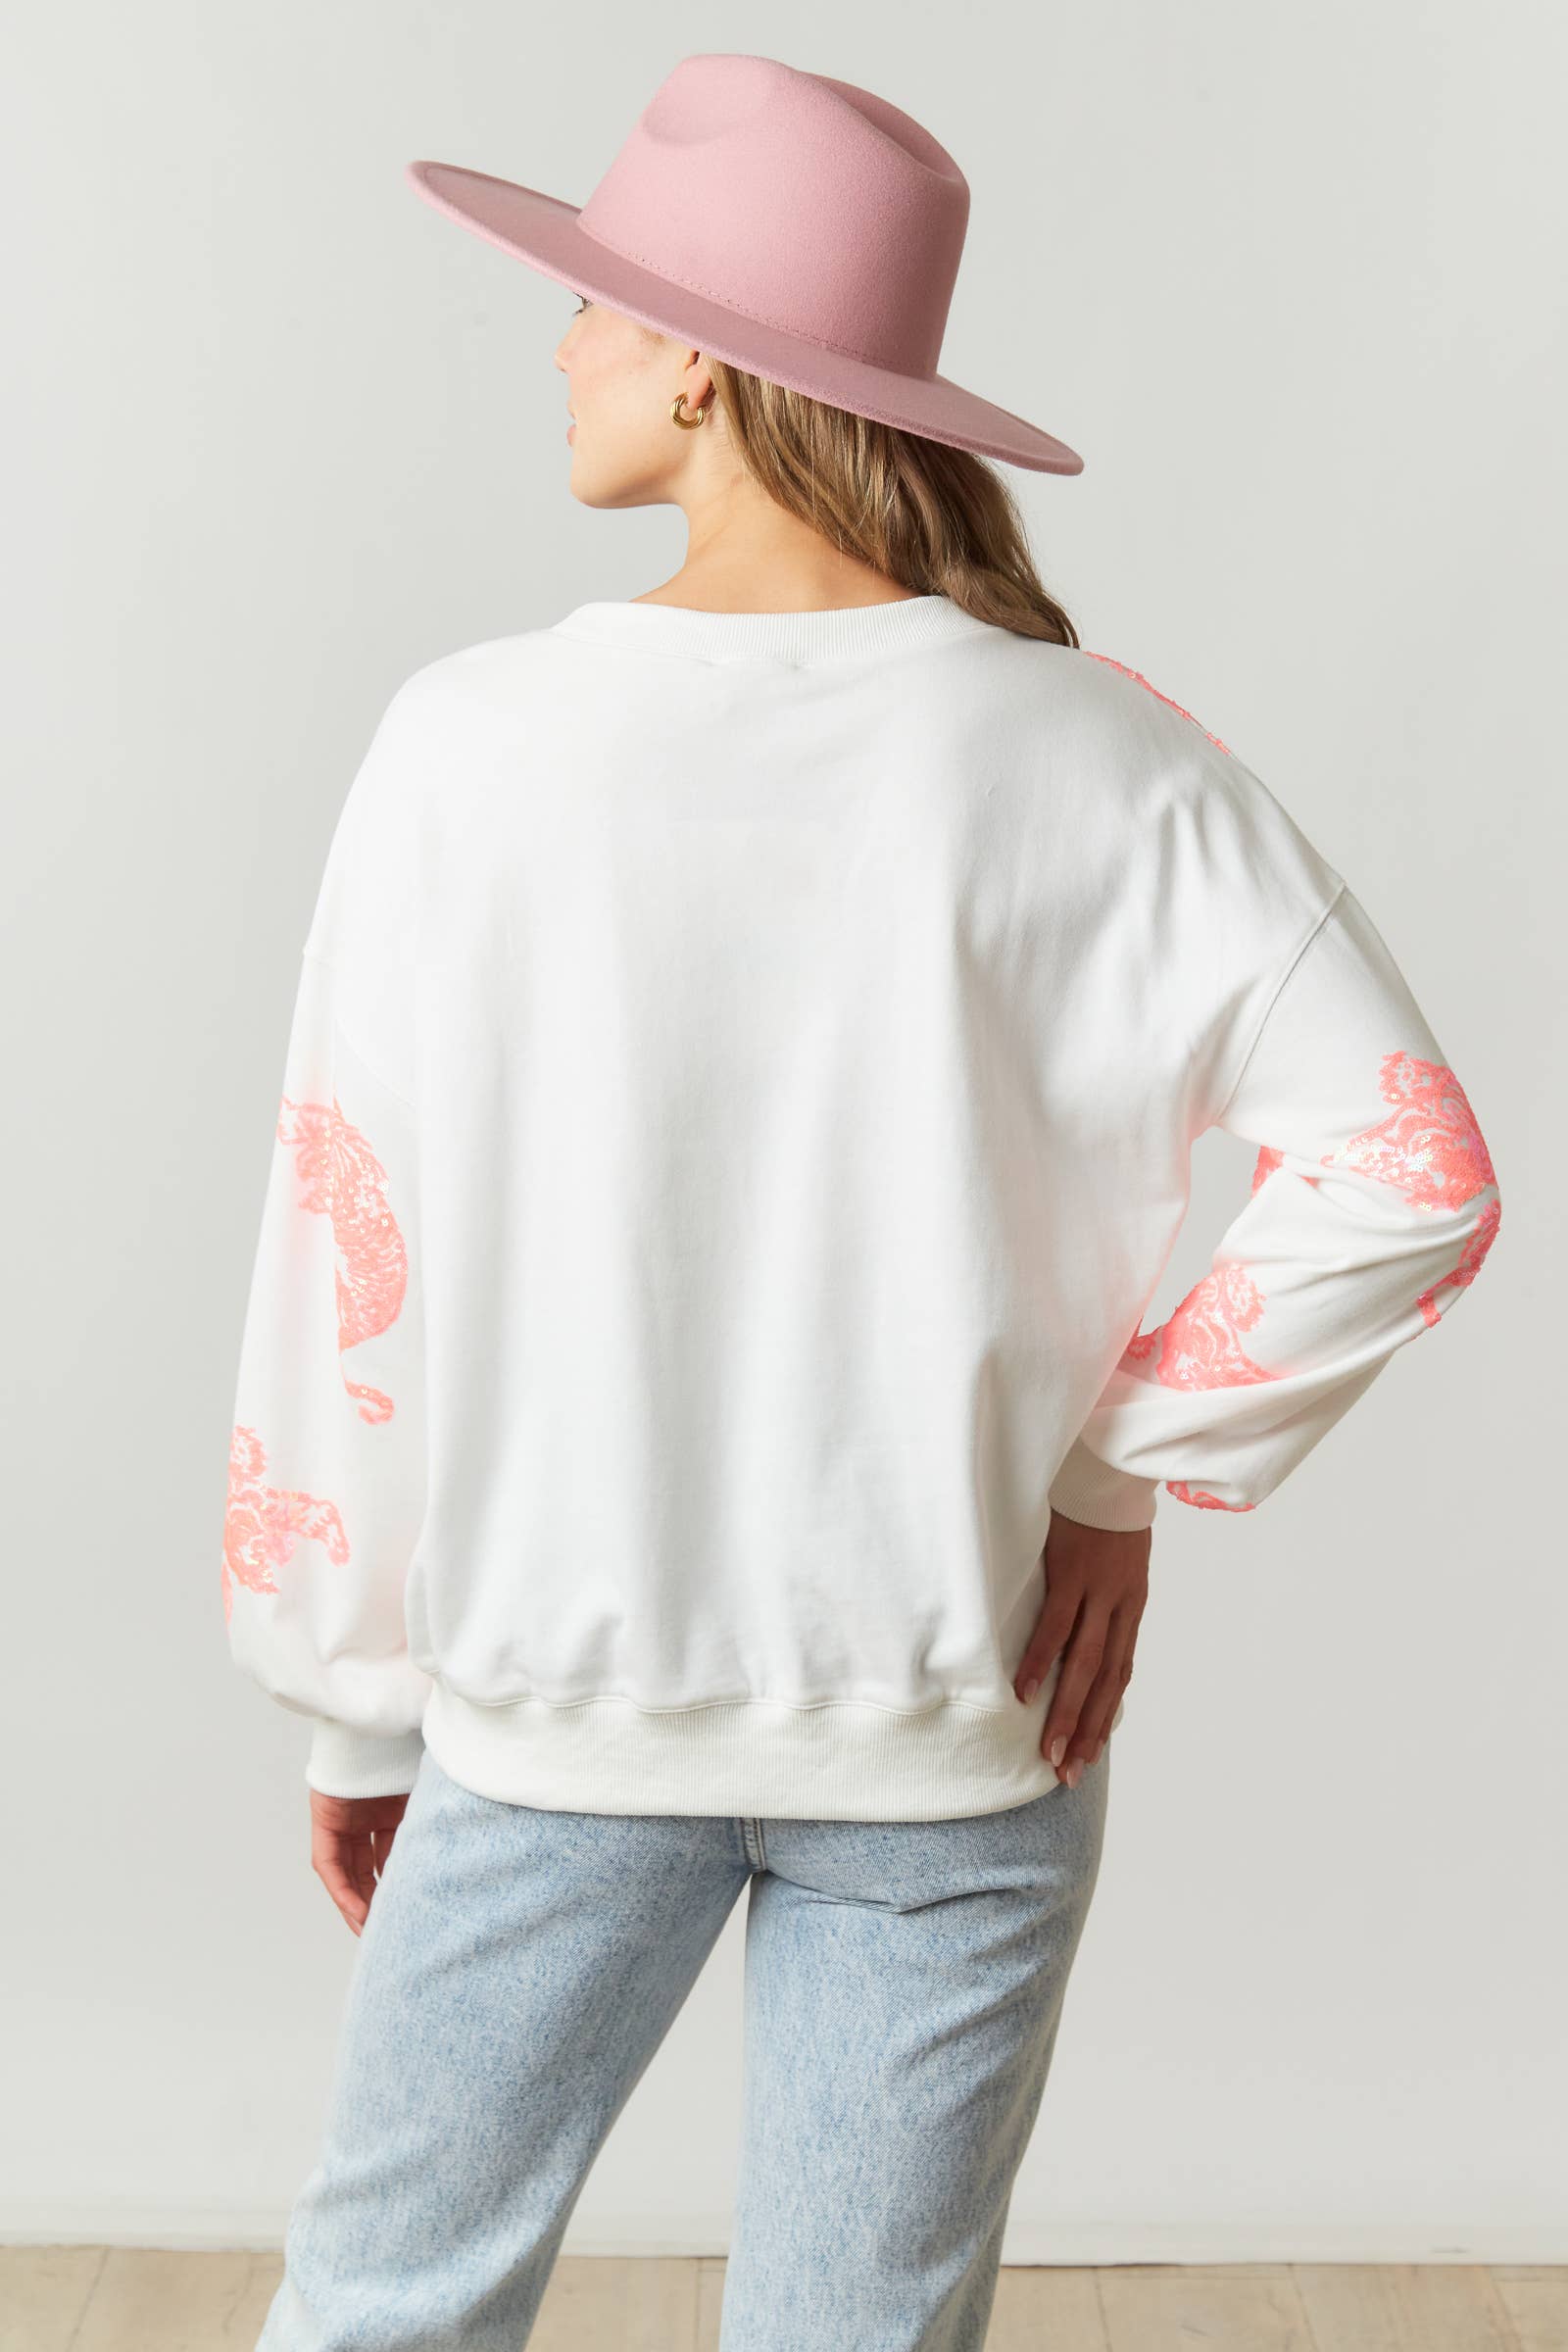 Crew Neck Pull Over with Sequin Tigers - IFKT54483-01: M / WHITE/PINK - Pretty Crafty Lady Shop